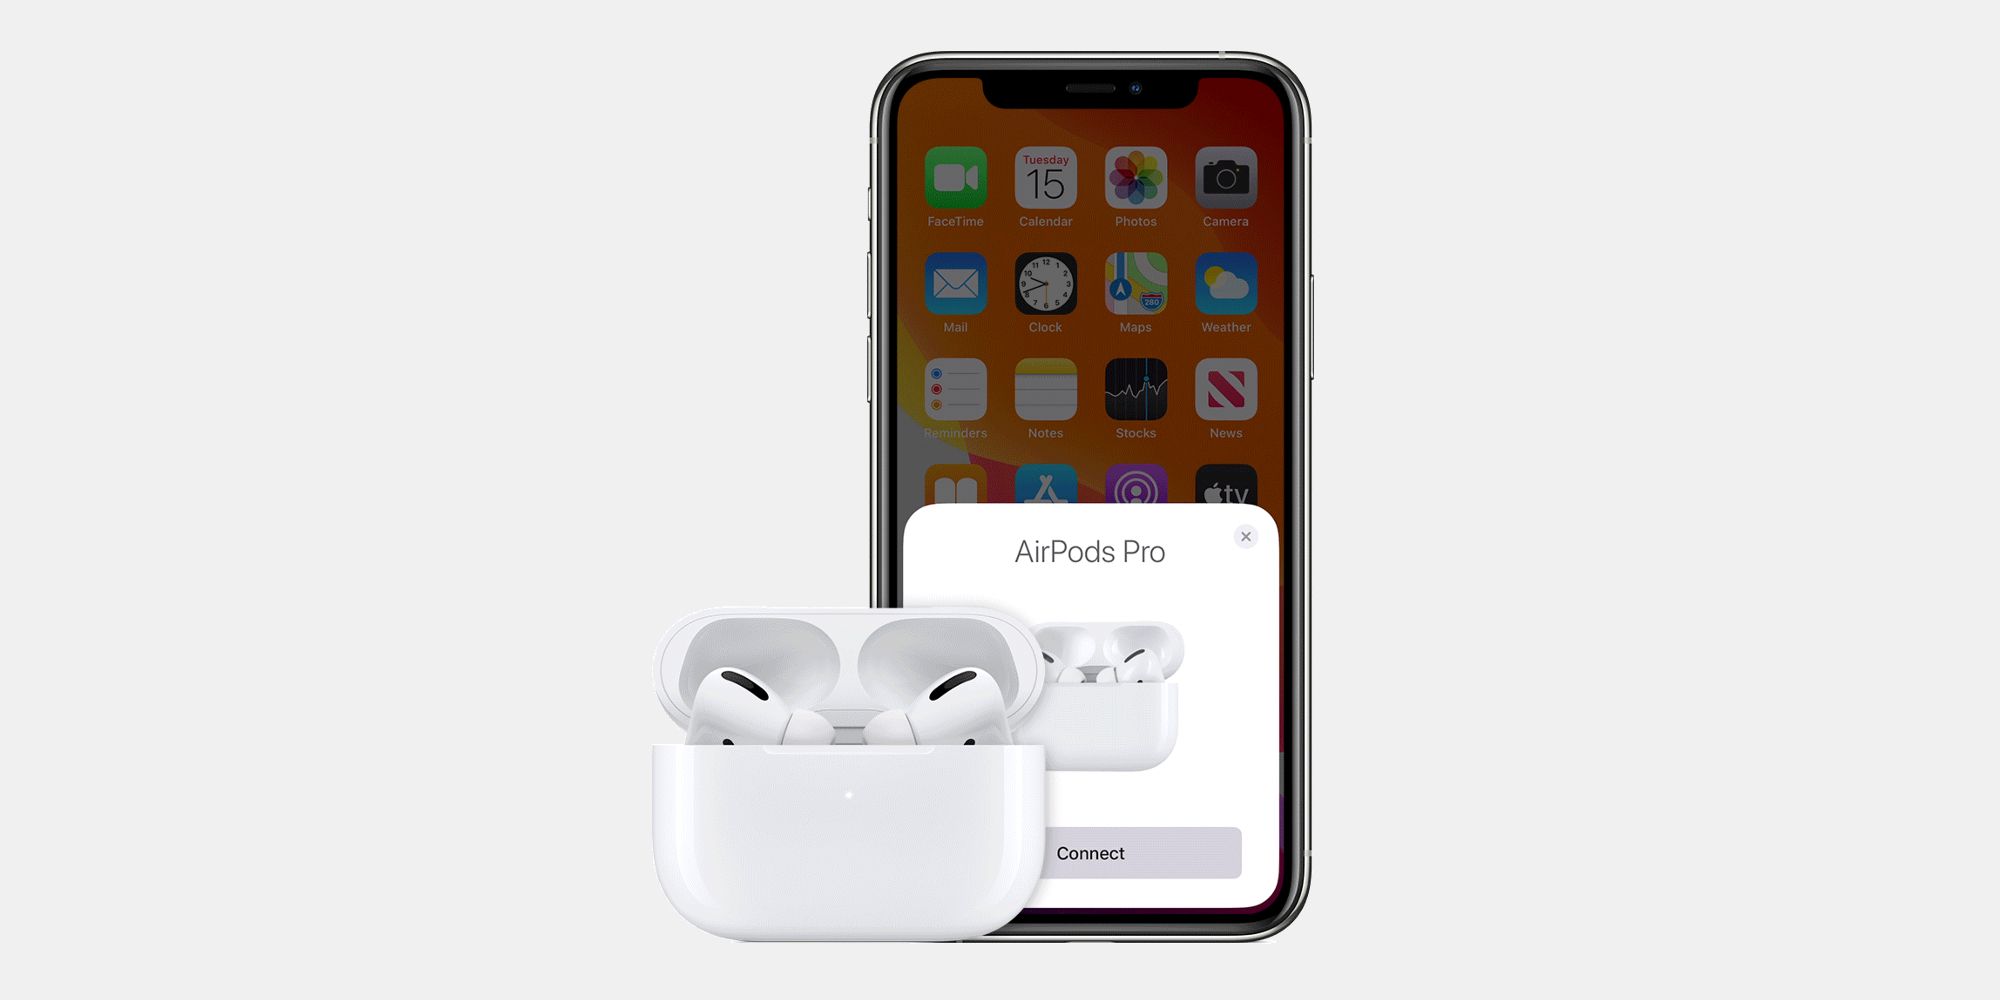 AirPods connecting to iPhone